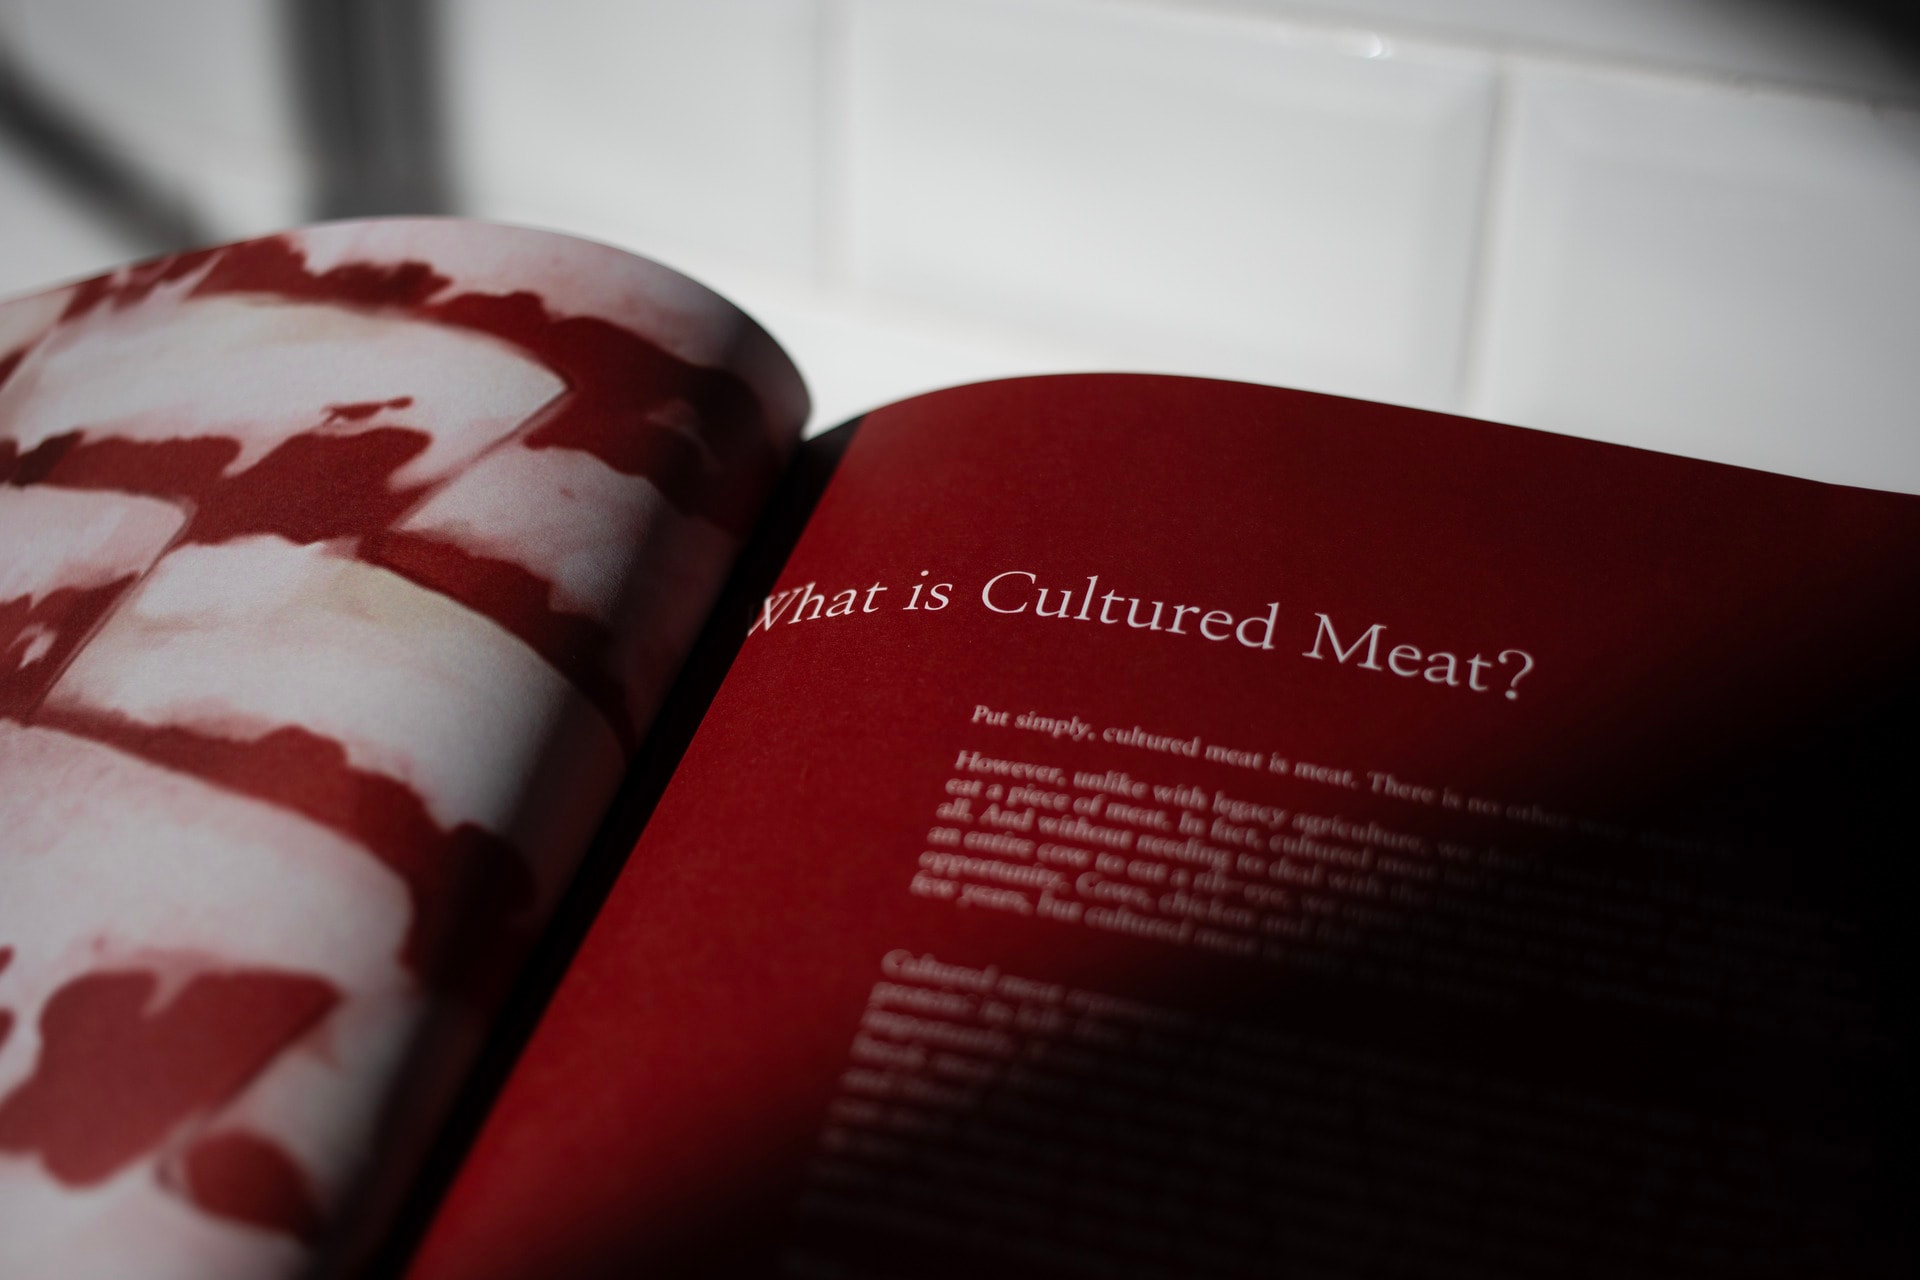 A close-up of a section of an open book. The page on the left has a red and white image and the page on the right has white text on a red background reading: "What is Cultured Meat?".